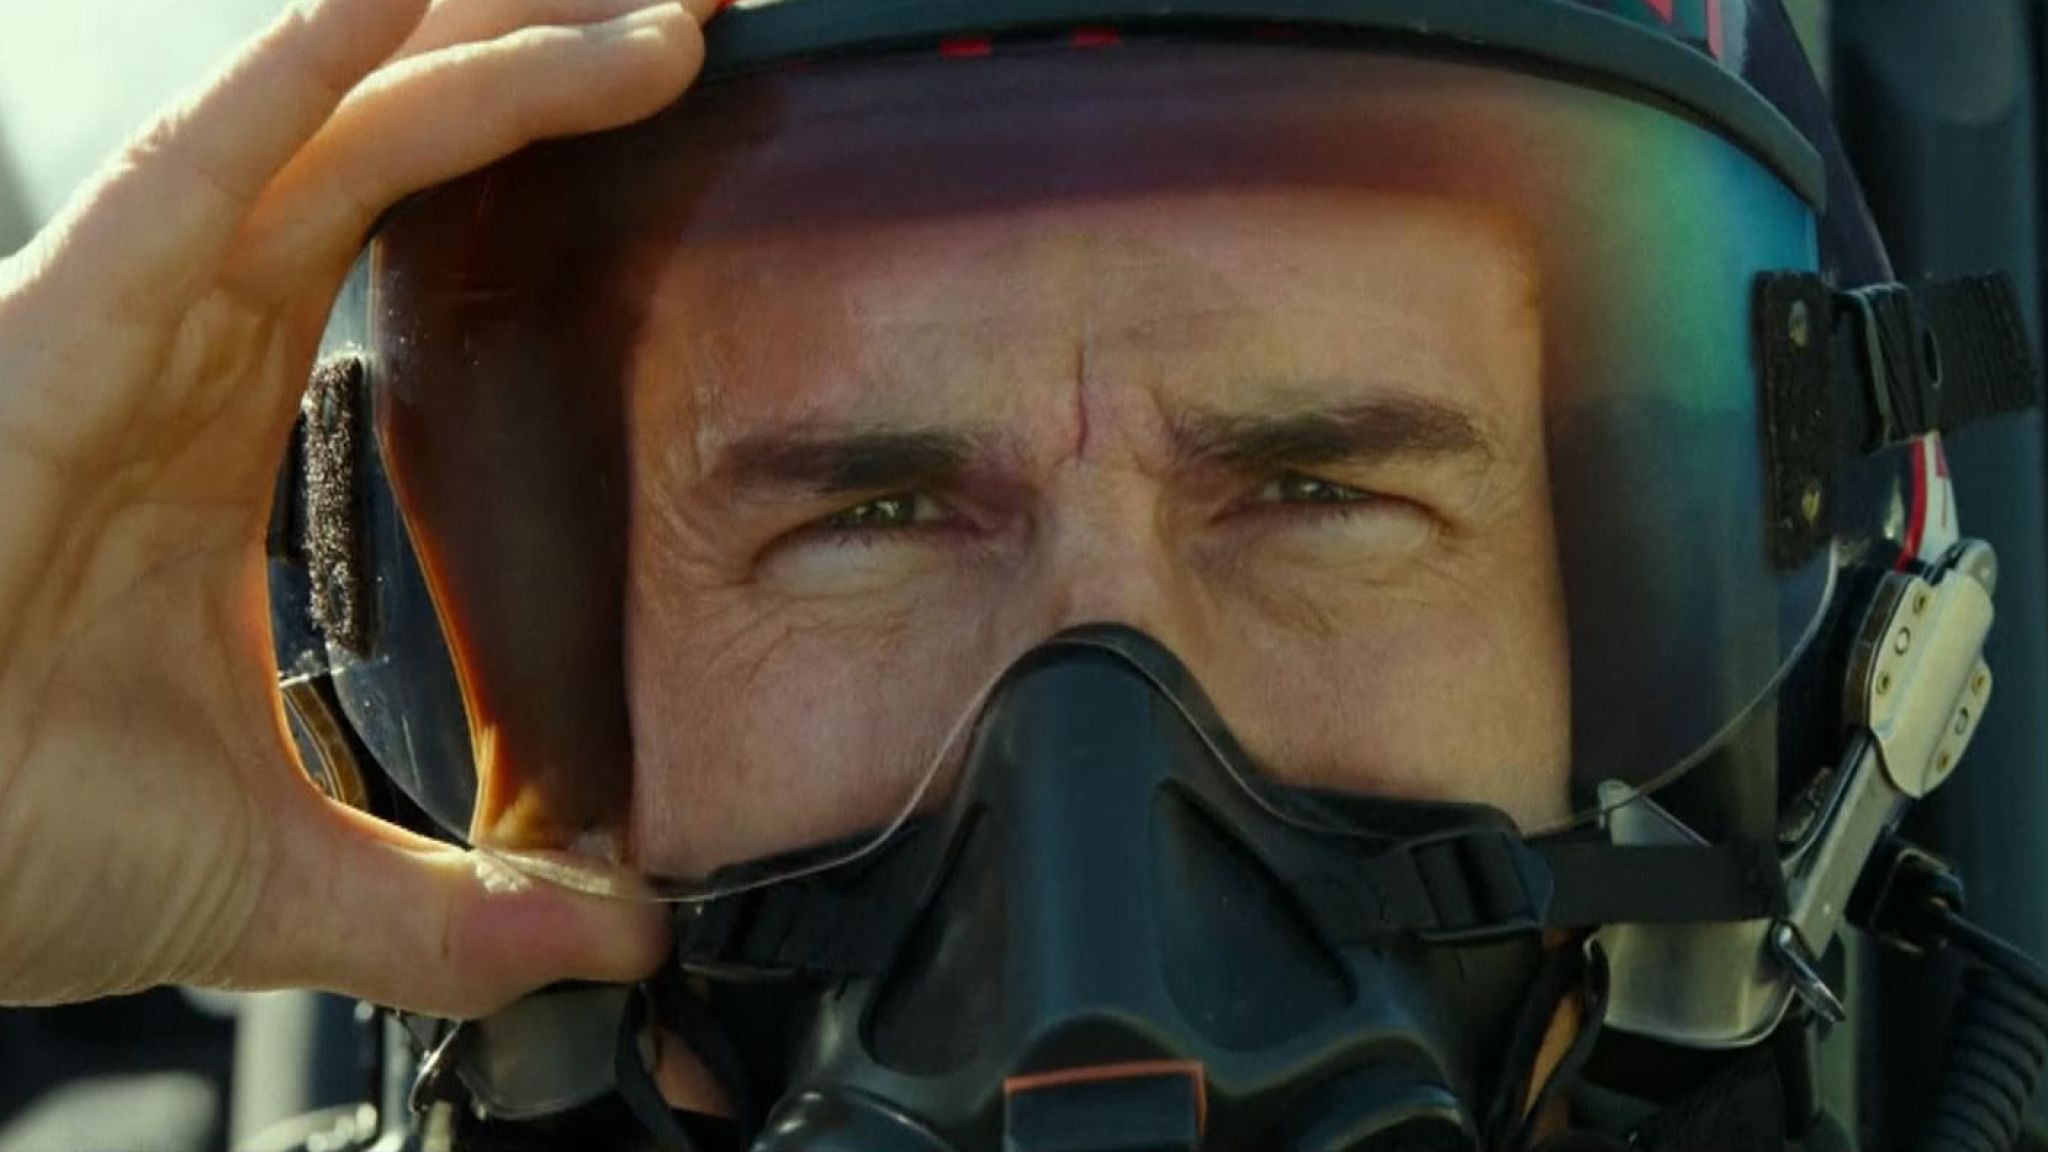 Top Gun Maverick trailer: Five things we have learned about new